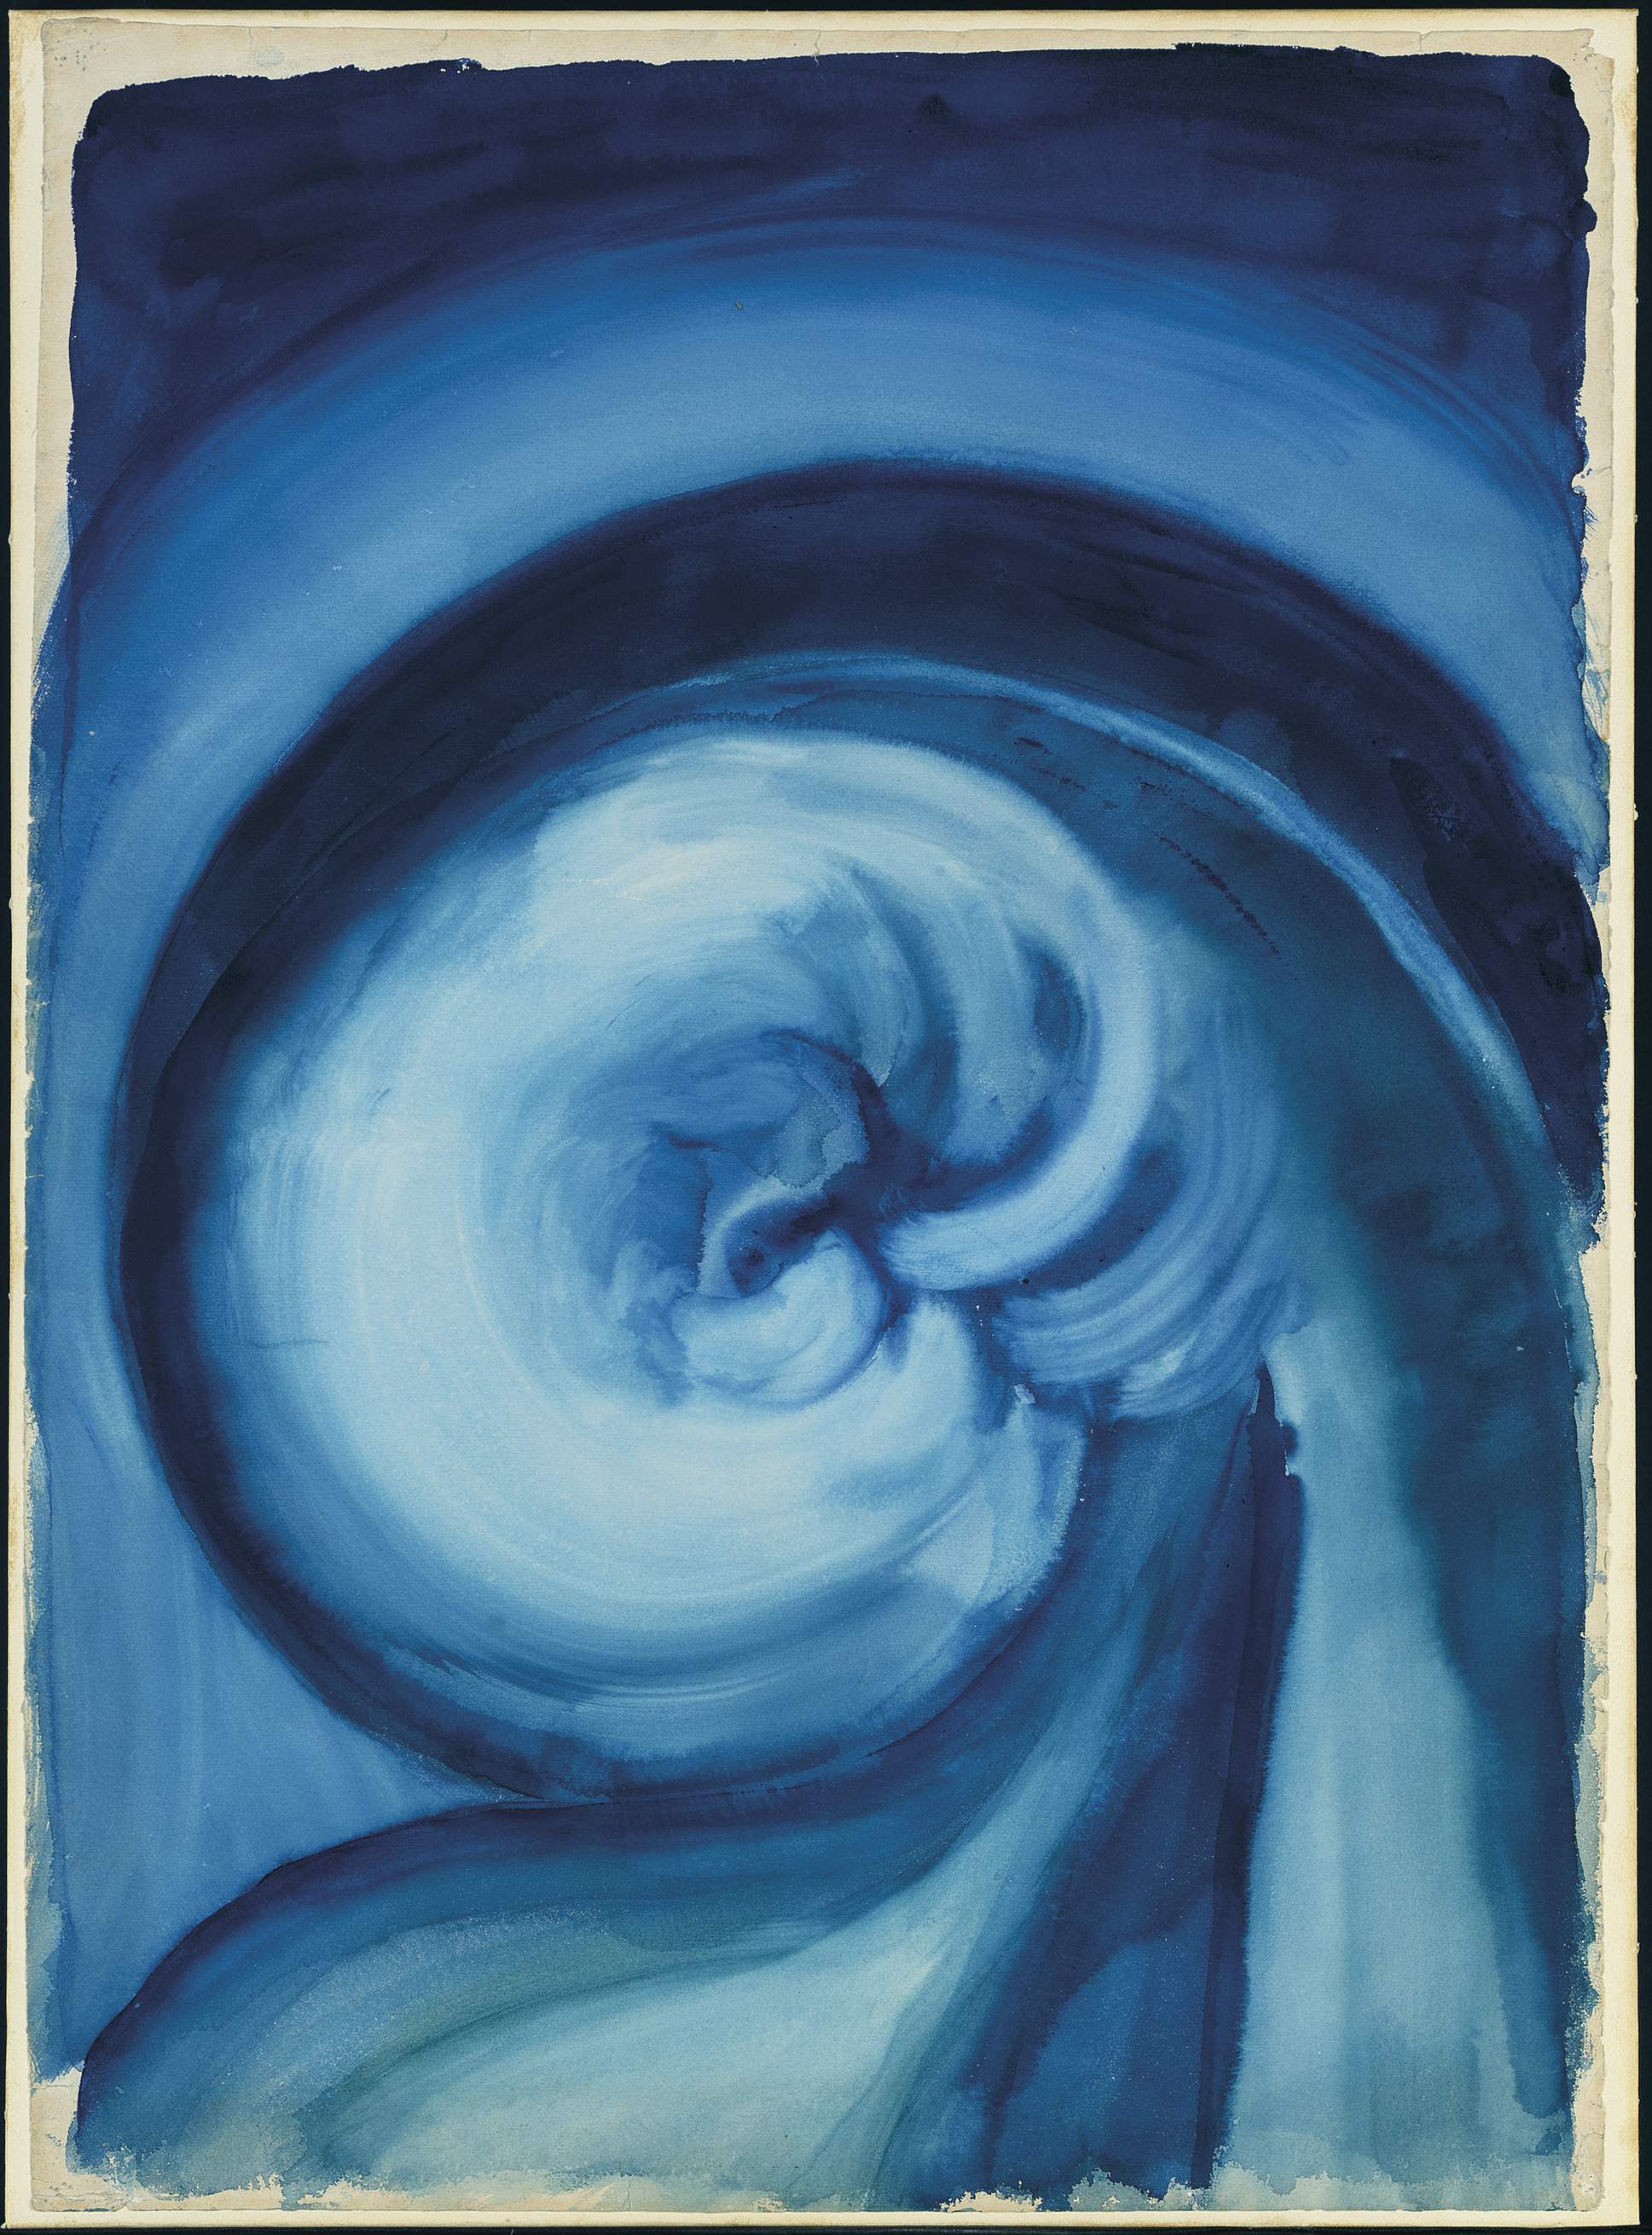 Georgia O'Keeffe (1887-1986), “Blue I,” watercolor on paper, fetched $ 2,405,000.<br>© 2016 Georgia O'Keeffe Museum / Artists Rights Society (ARS), New York